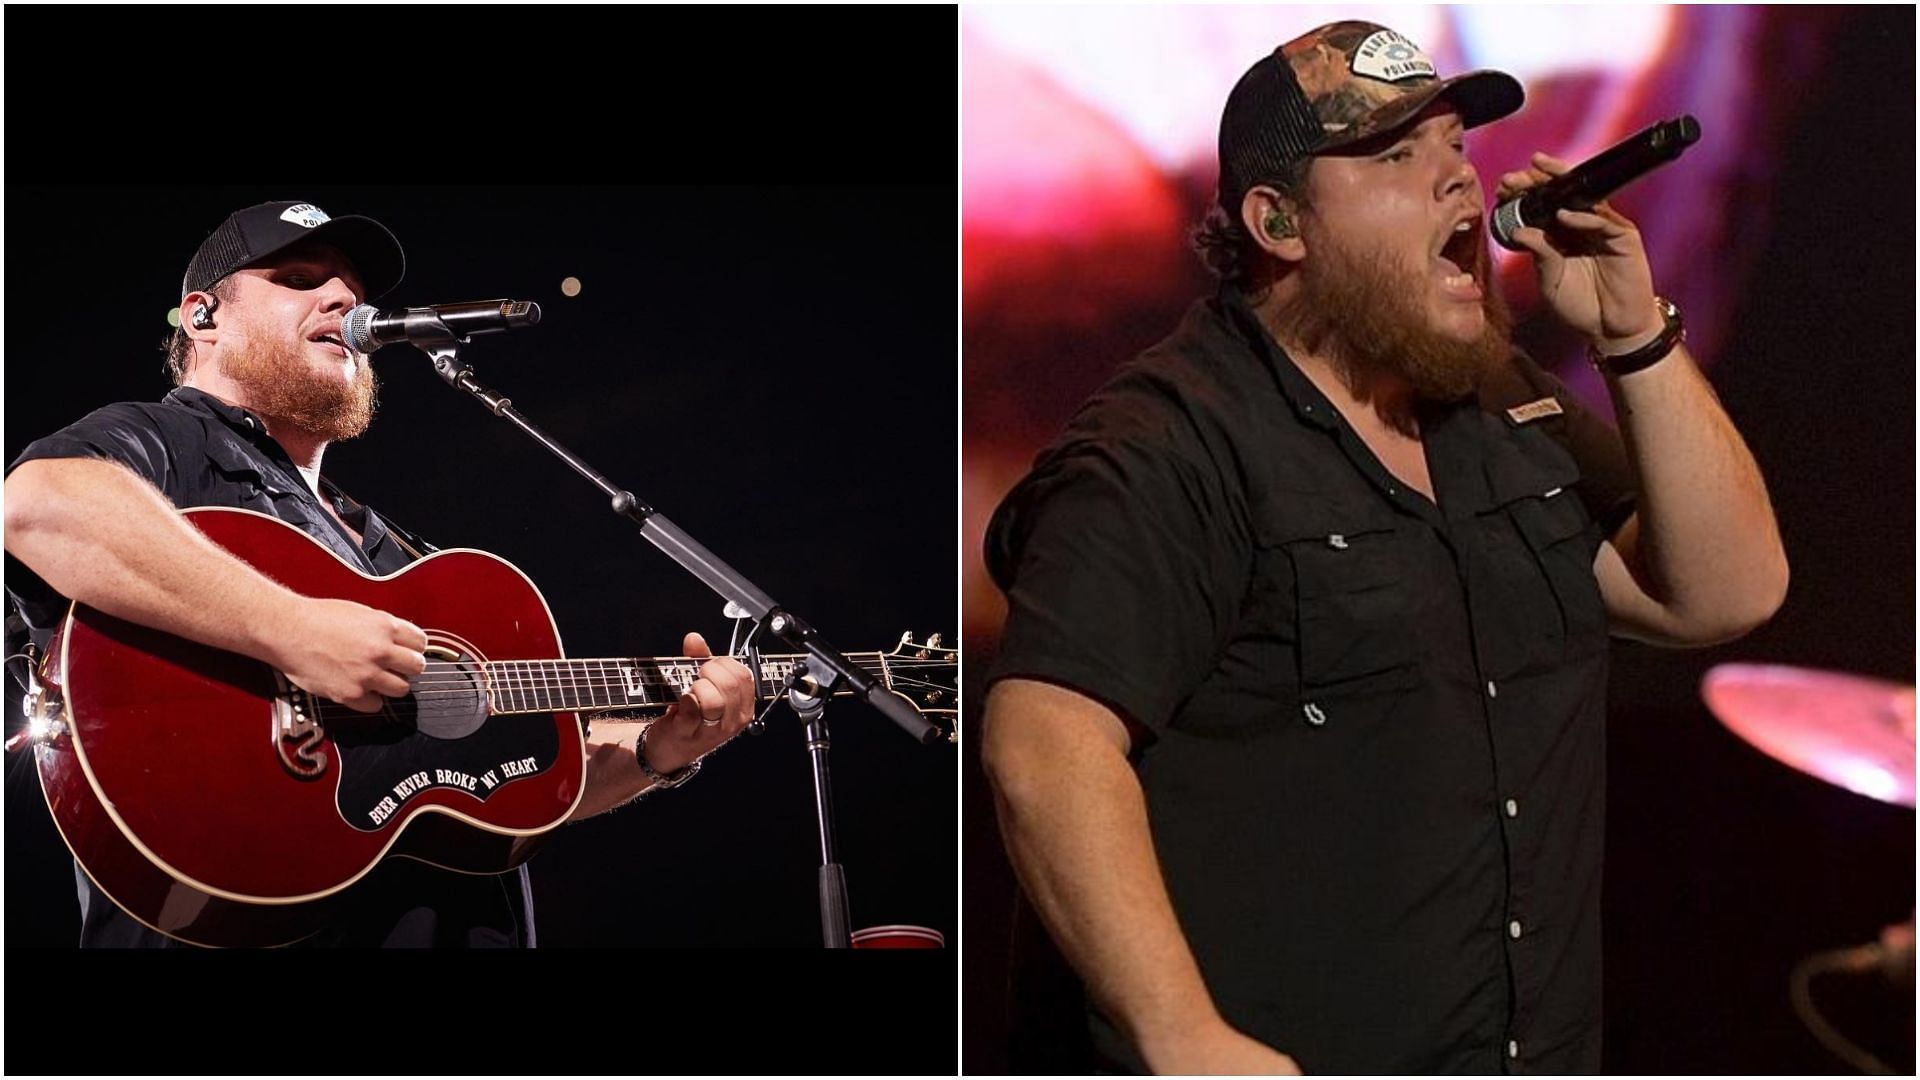 Luke Combs has announced his Middle of Somewhere Tour. (Images via Jason Kempin / Getty and Instagram / @lukecombs )